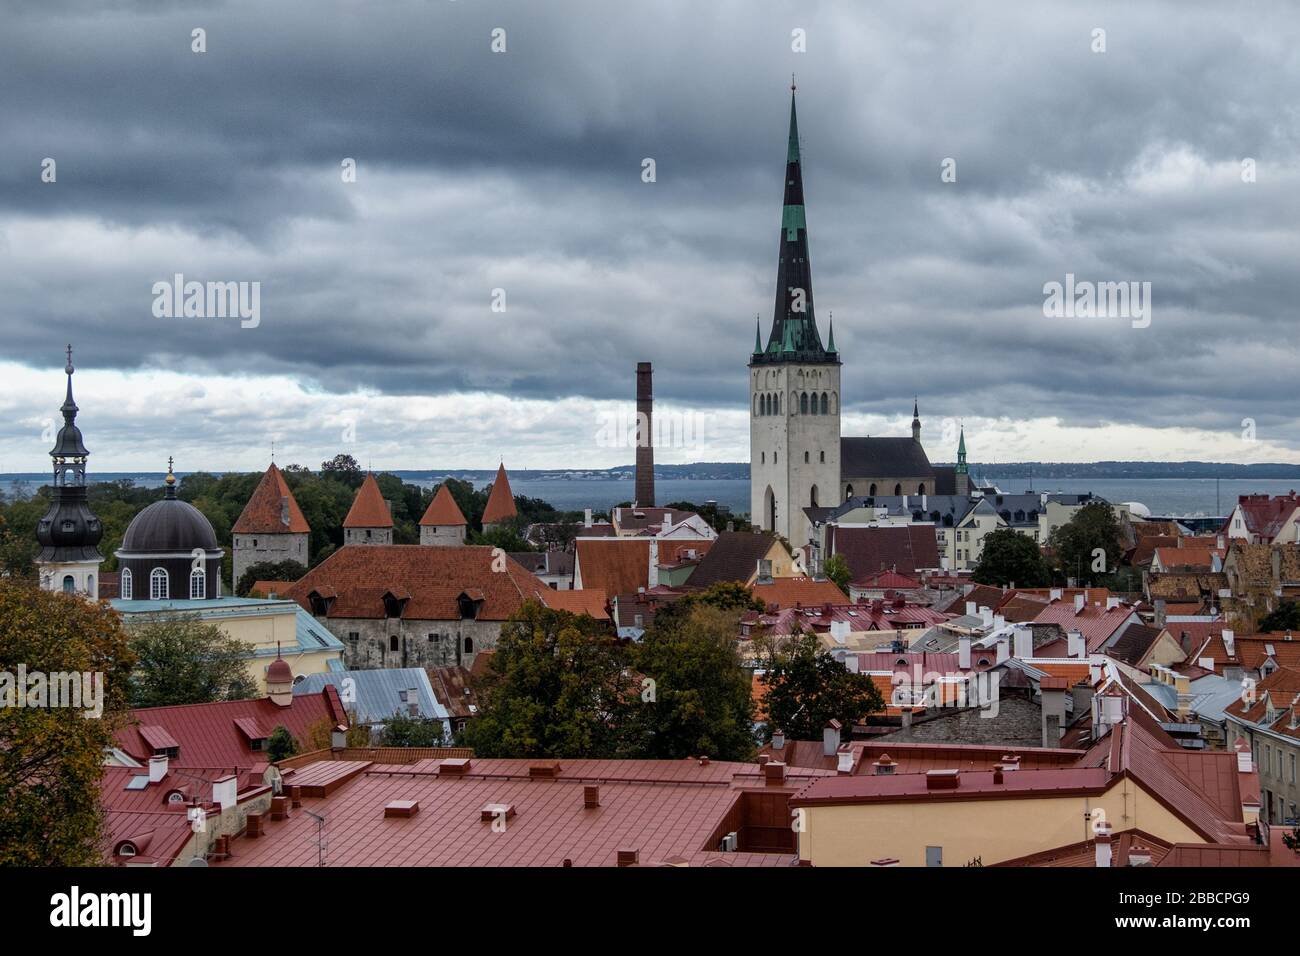 Cityscape view of the Old Town with the Oleviste Church, UNESCO World Heritage Site, Tallinn, Estonia Stock Photo